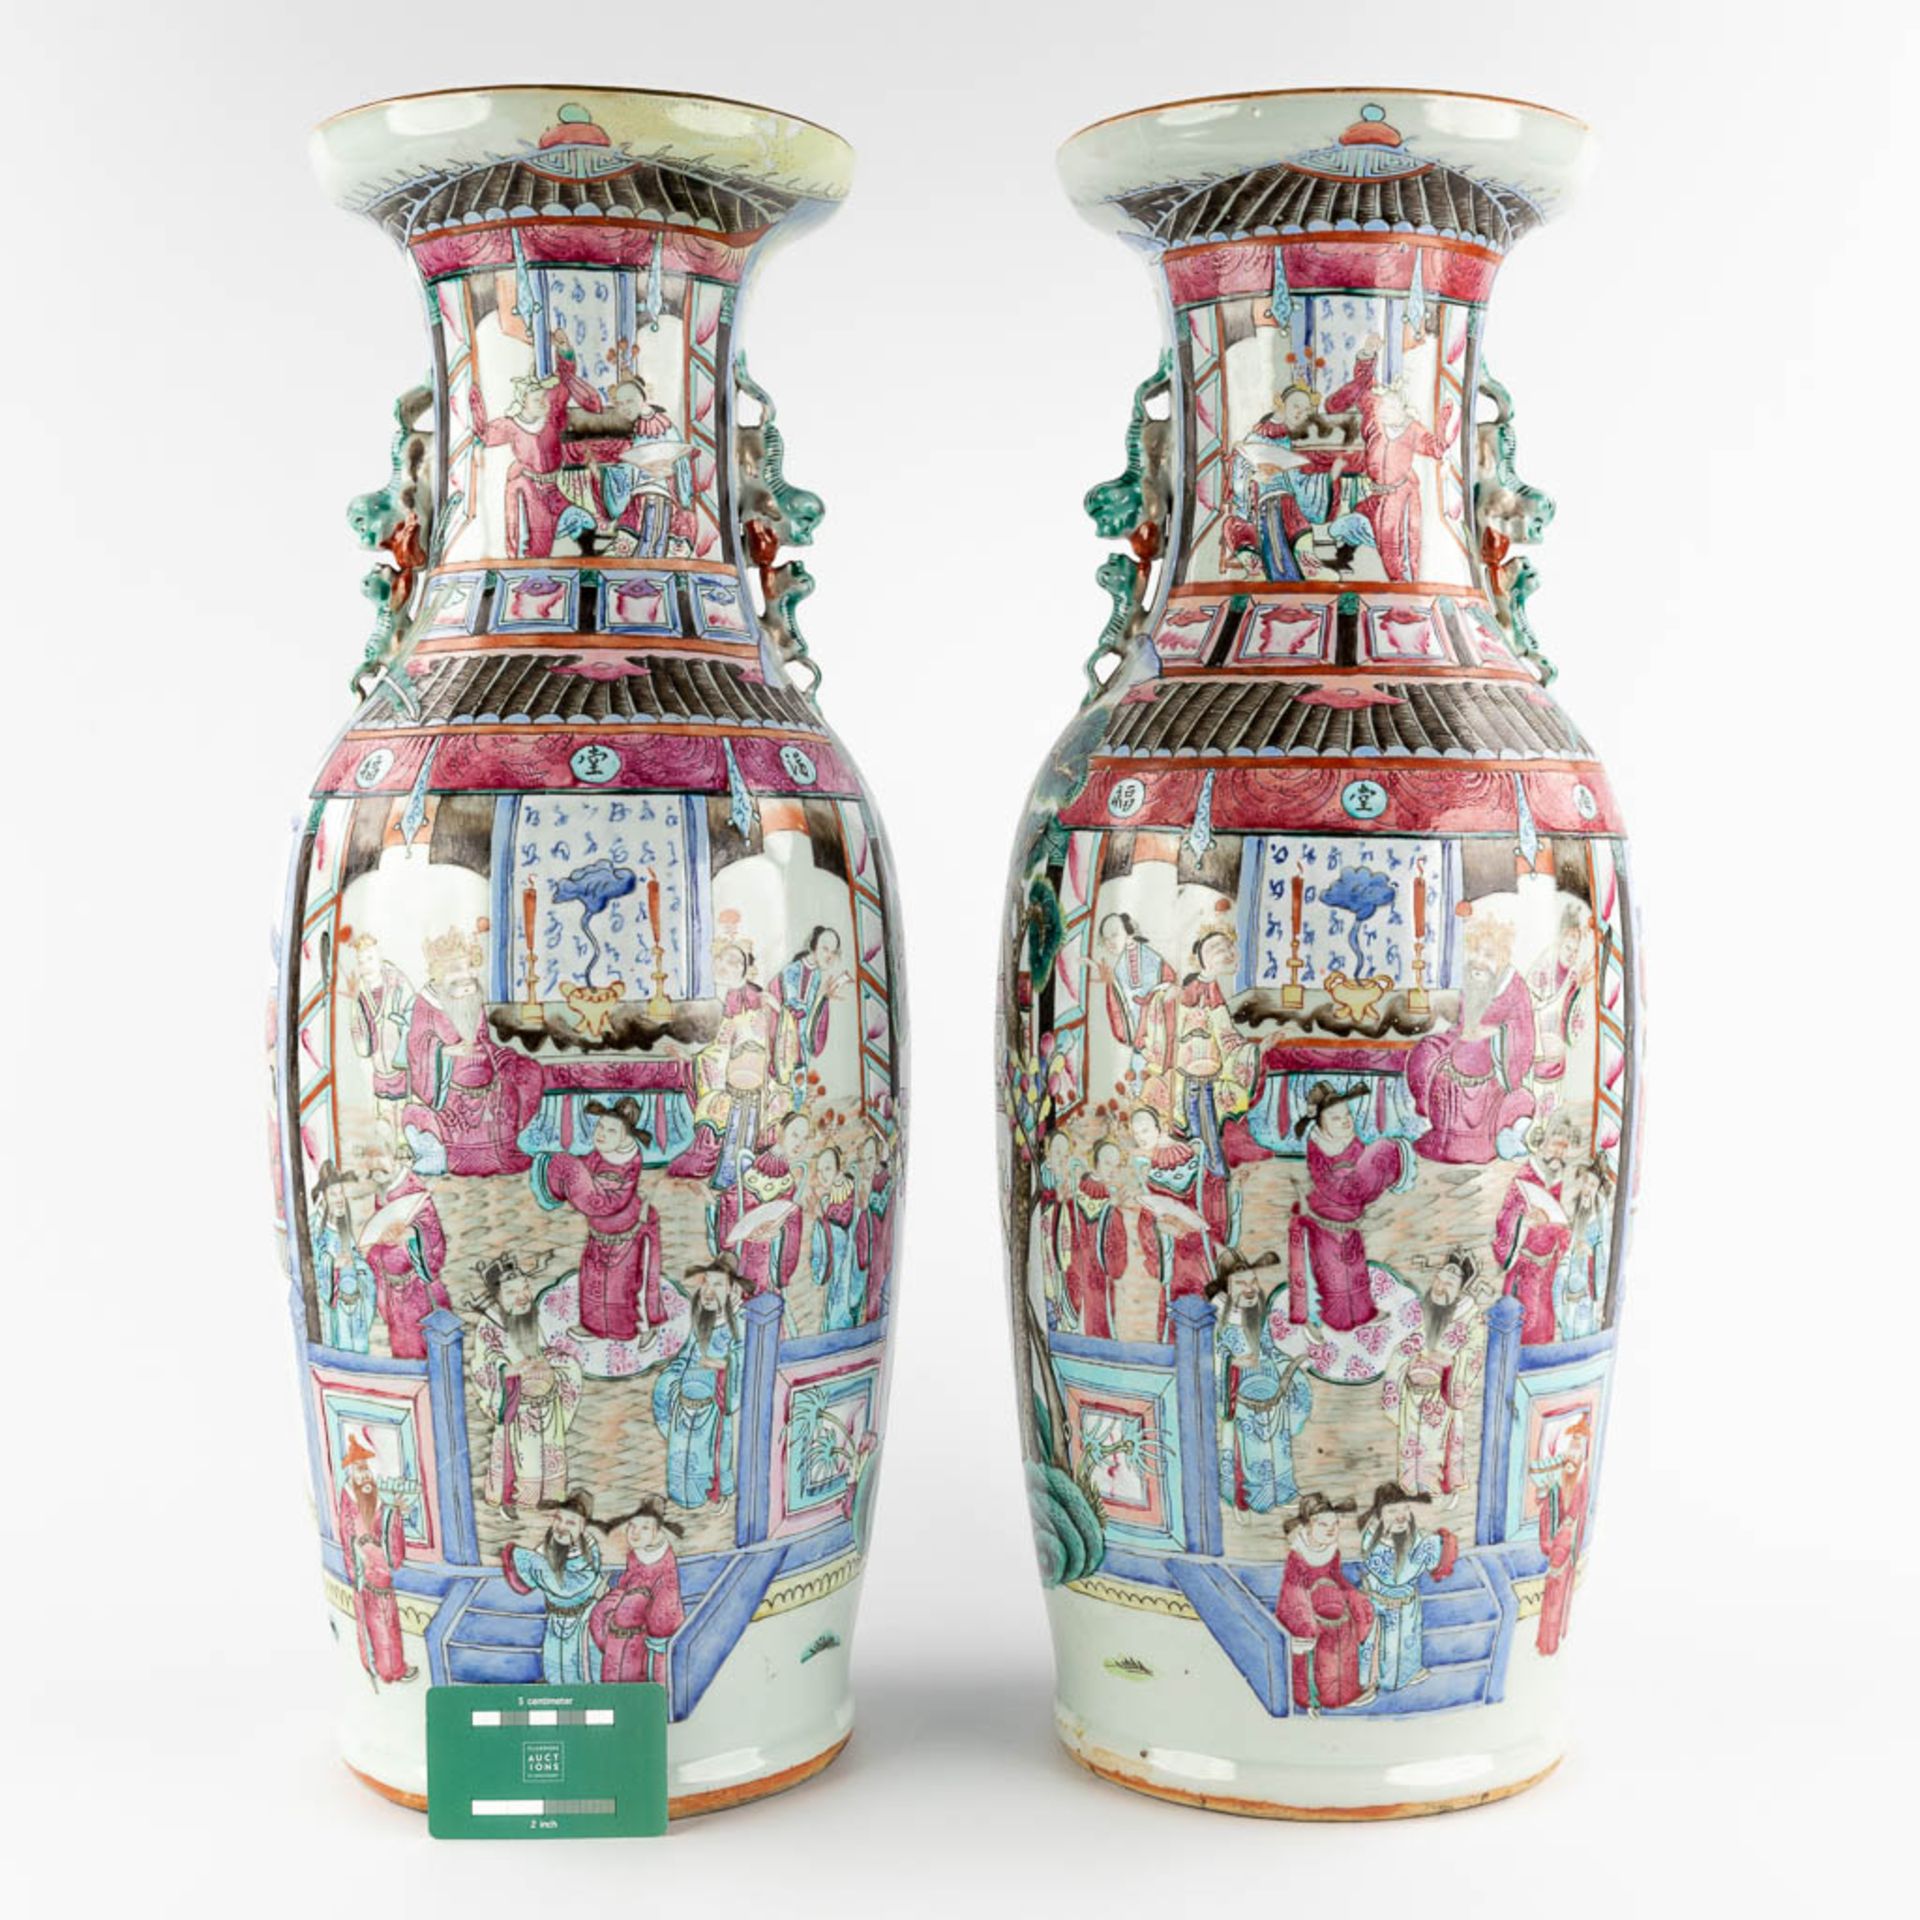 A pair of Chinese vases with Famille Rose vases with a temple scène, 19th C. (H:61 x D:23 cm) - Image 2 of 12